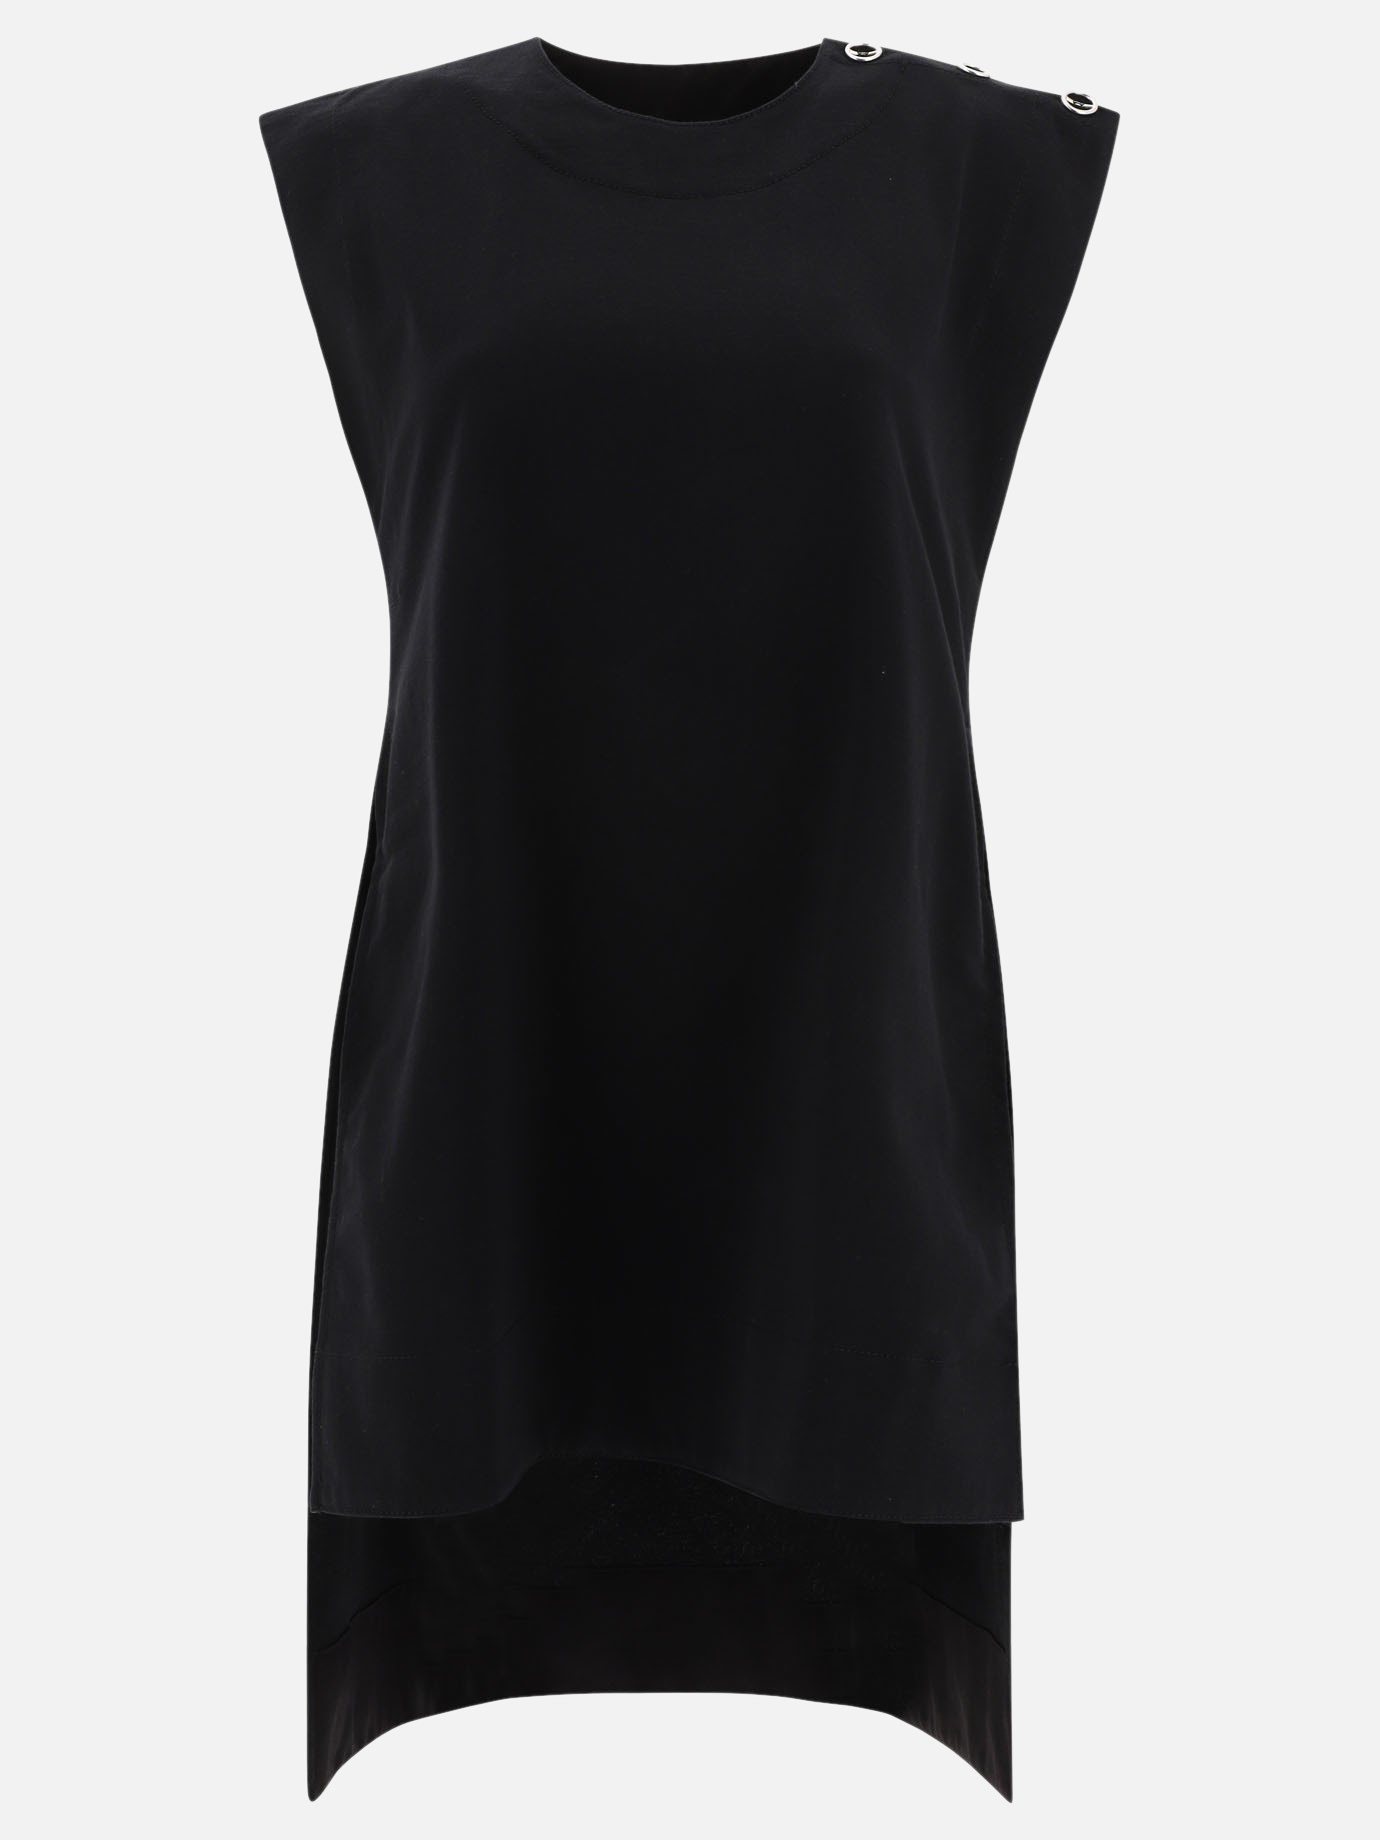 T-shirt with buttonsby Jil Sander - 4